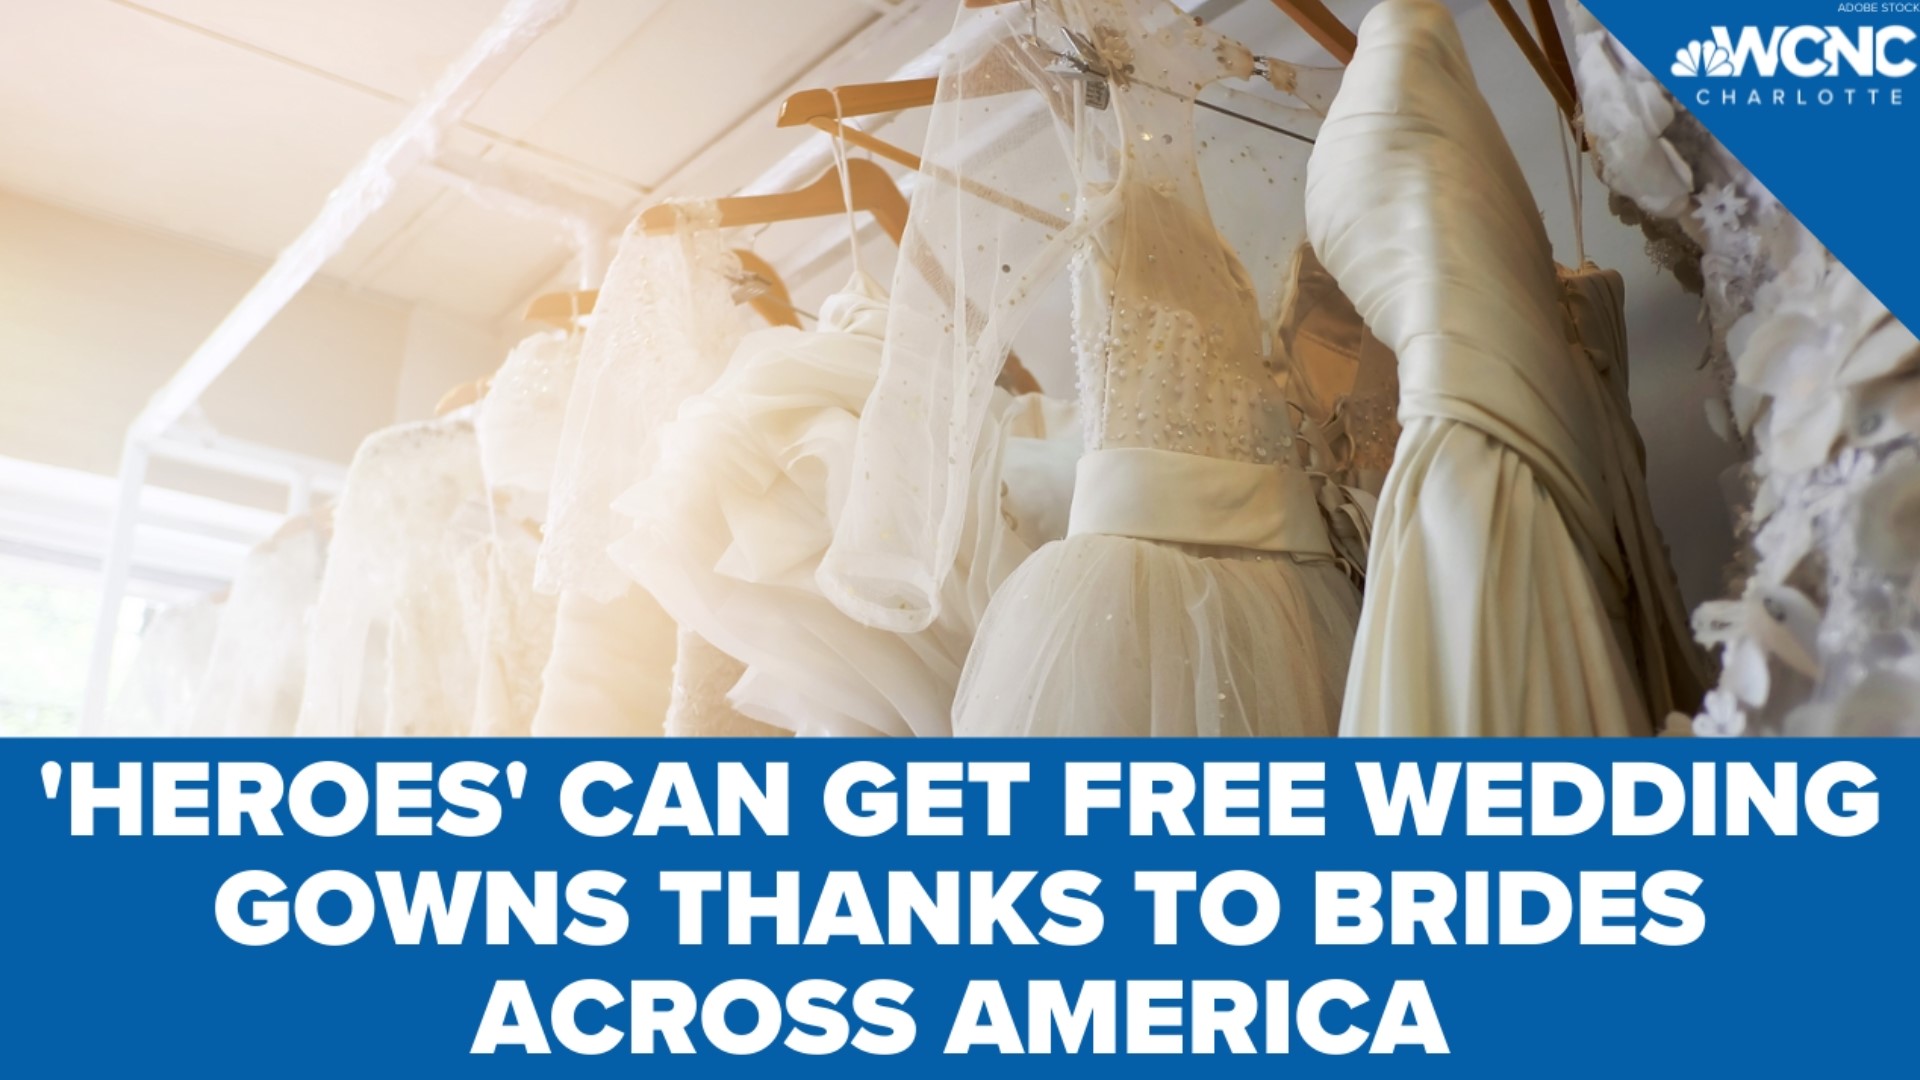 How to get a free wedding gown from Brides Across America